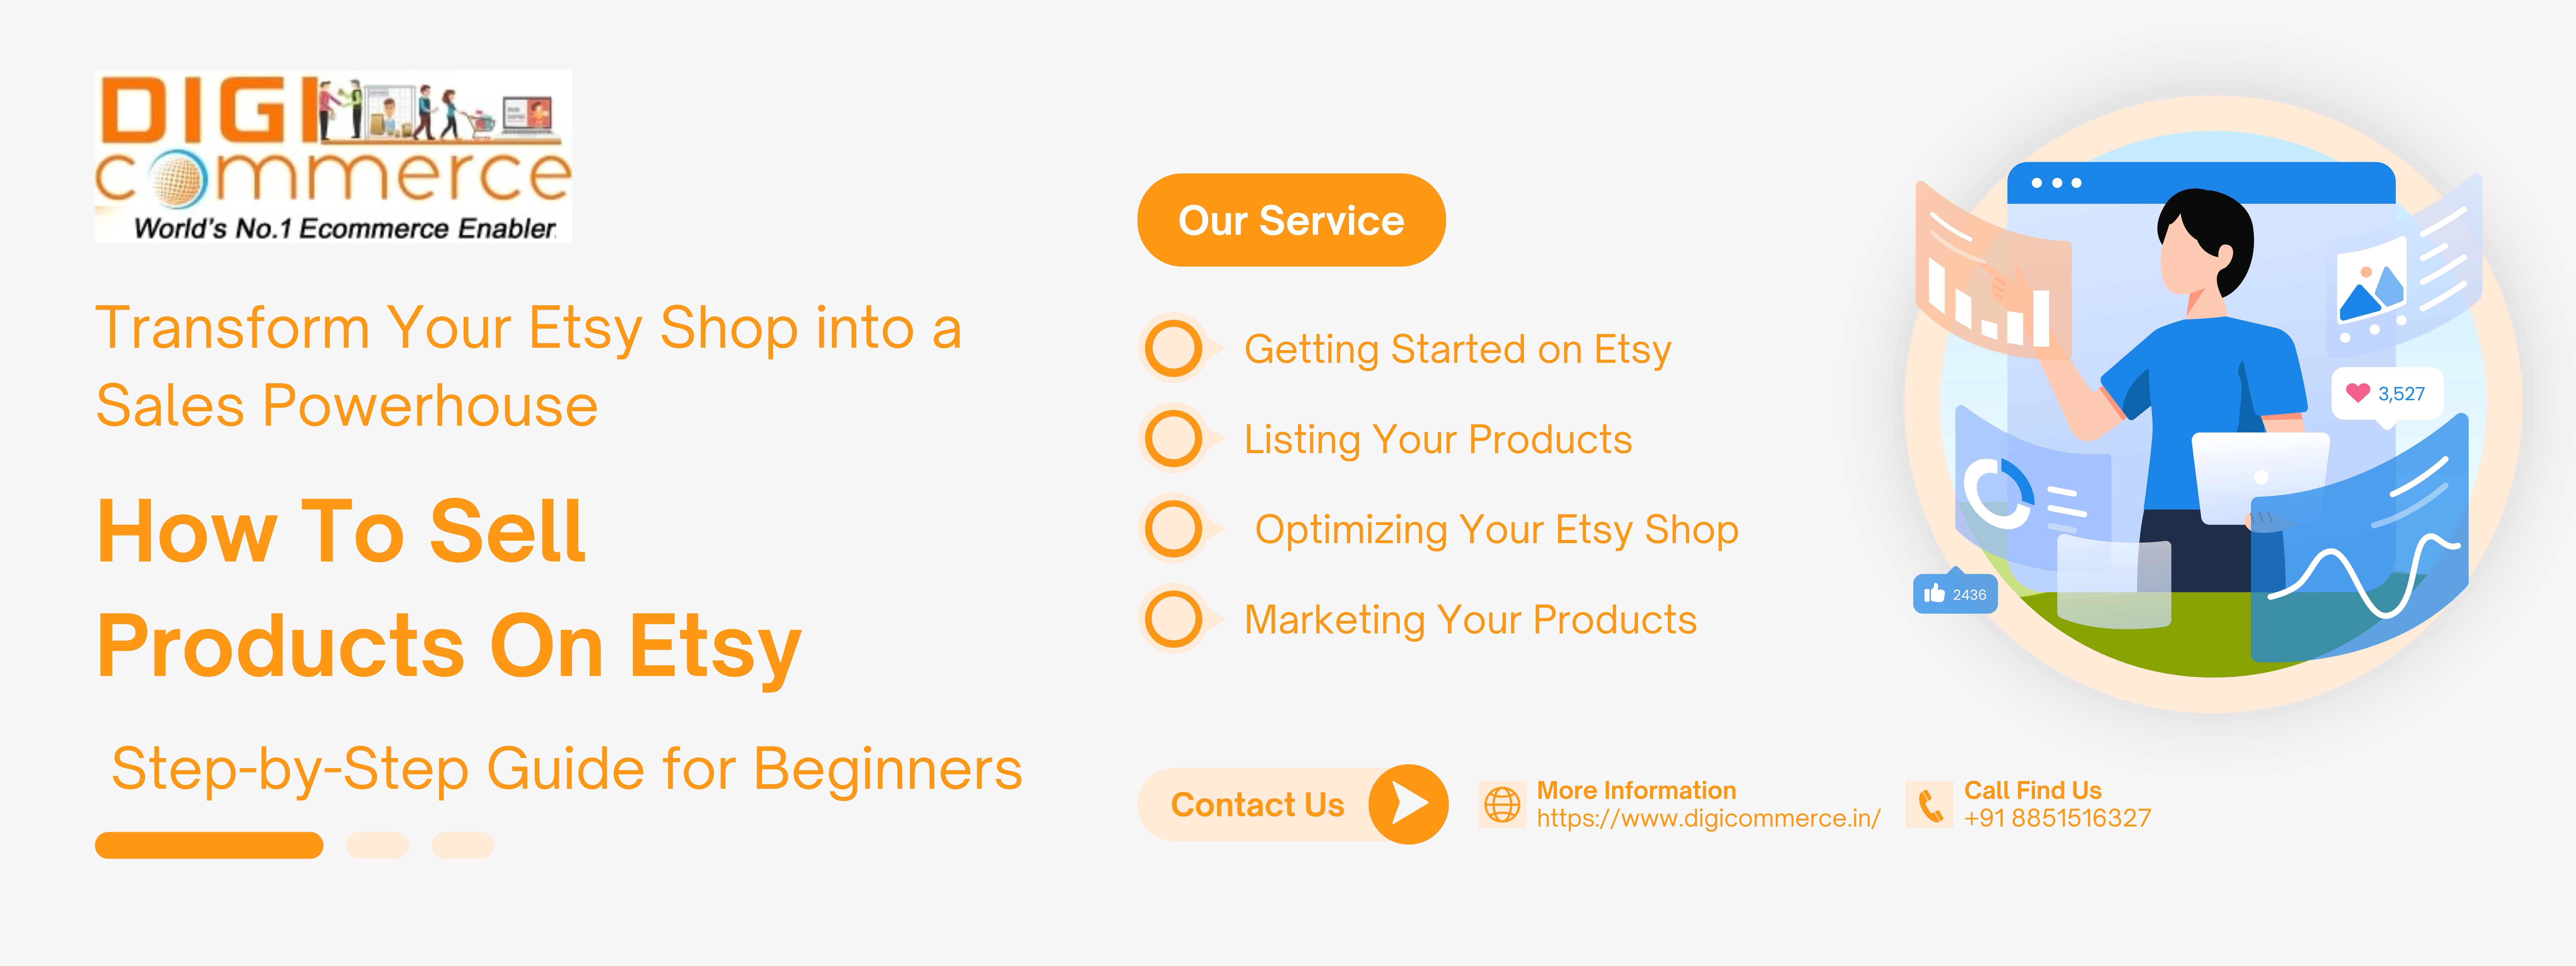 How to Sell Products on Etsy: Step-by-Step Guide for Beginners